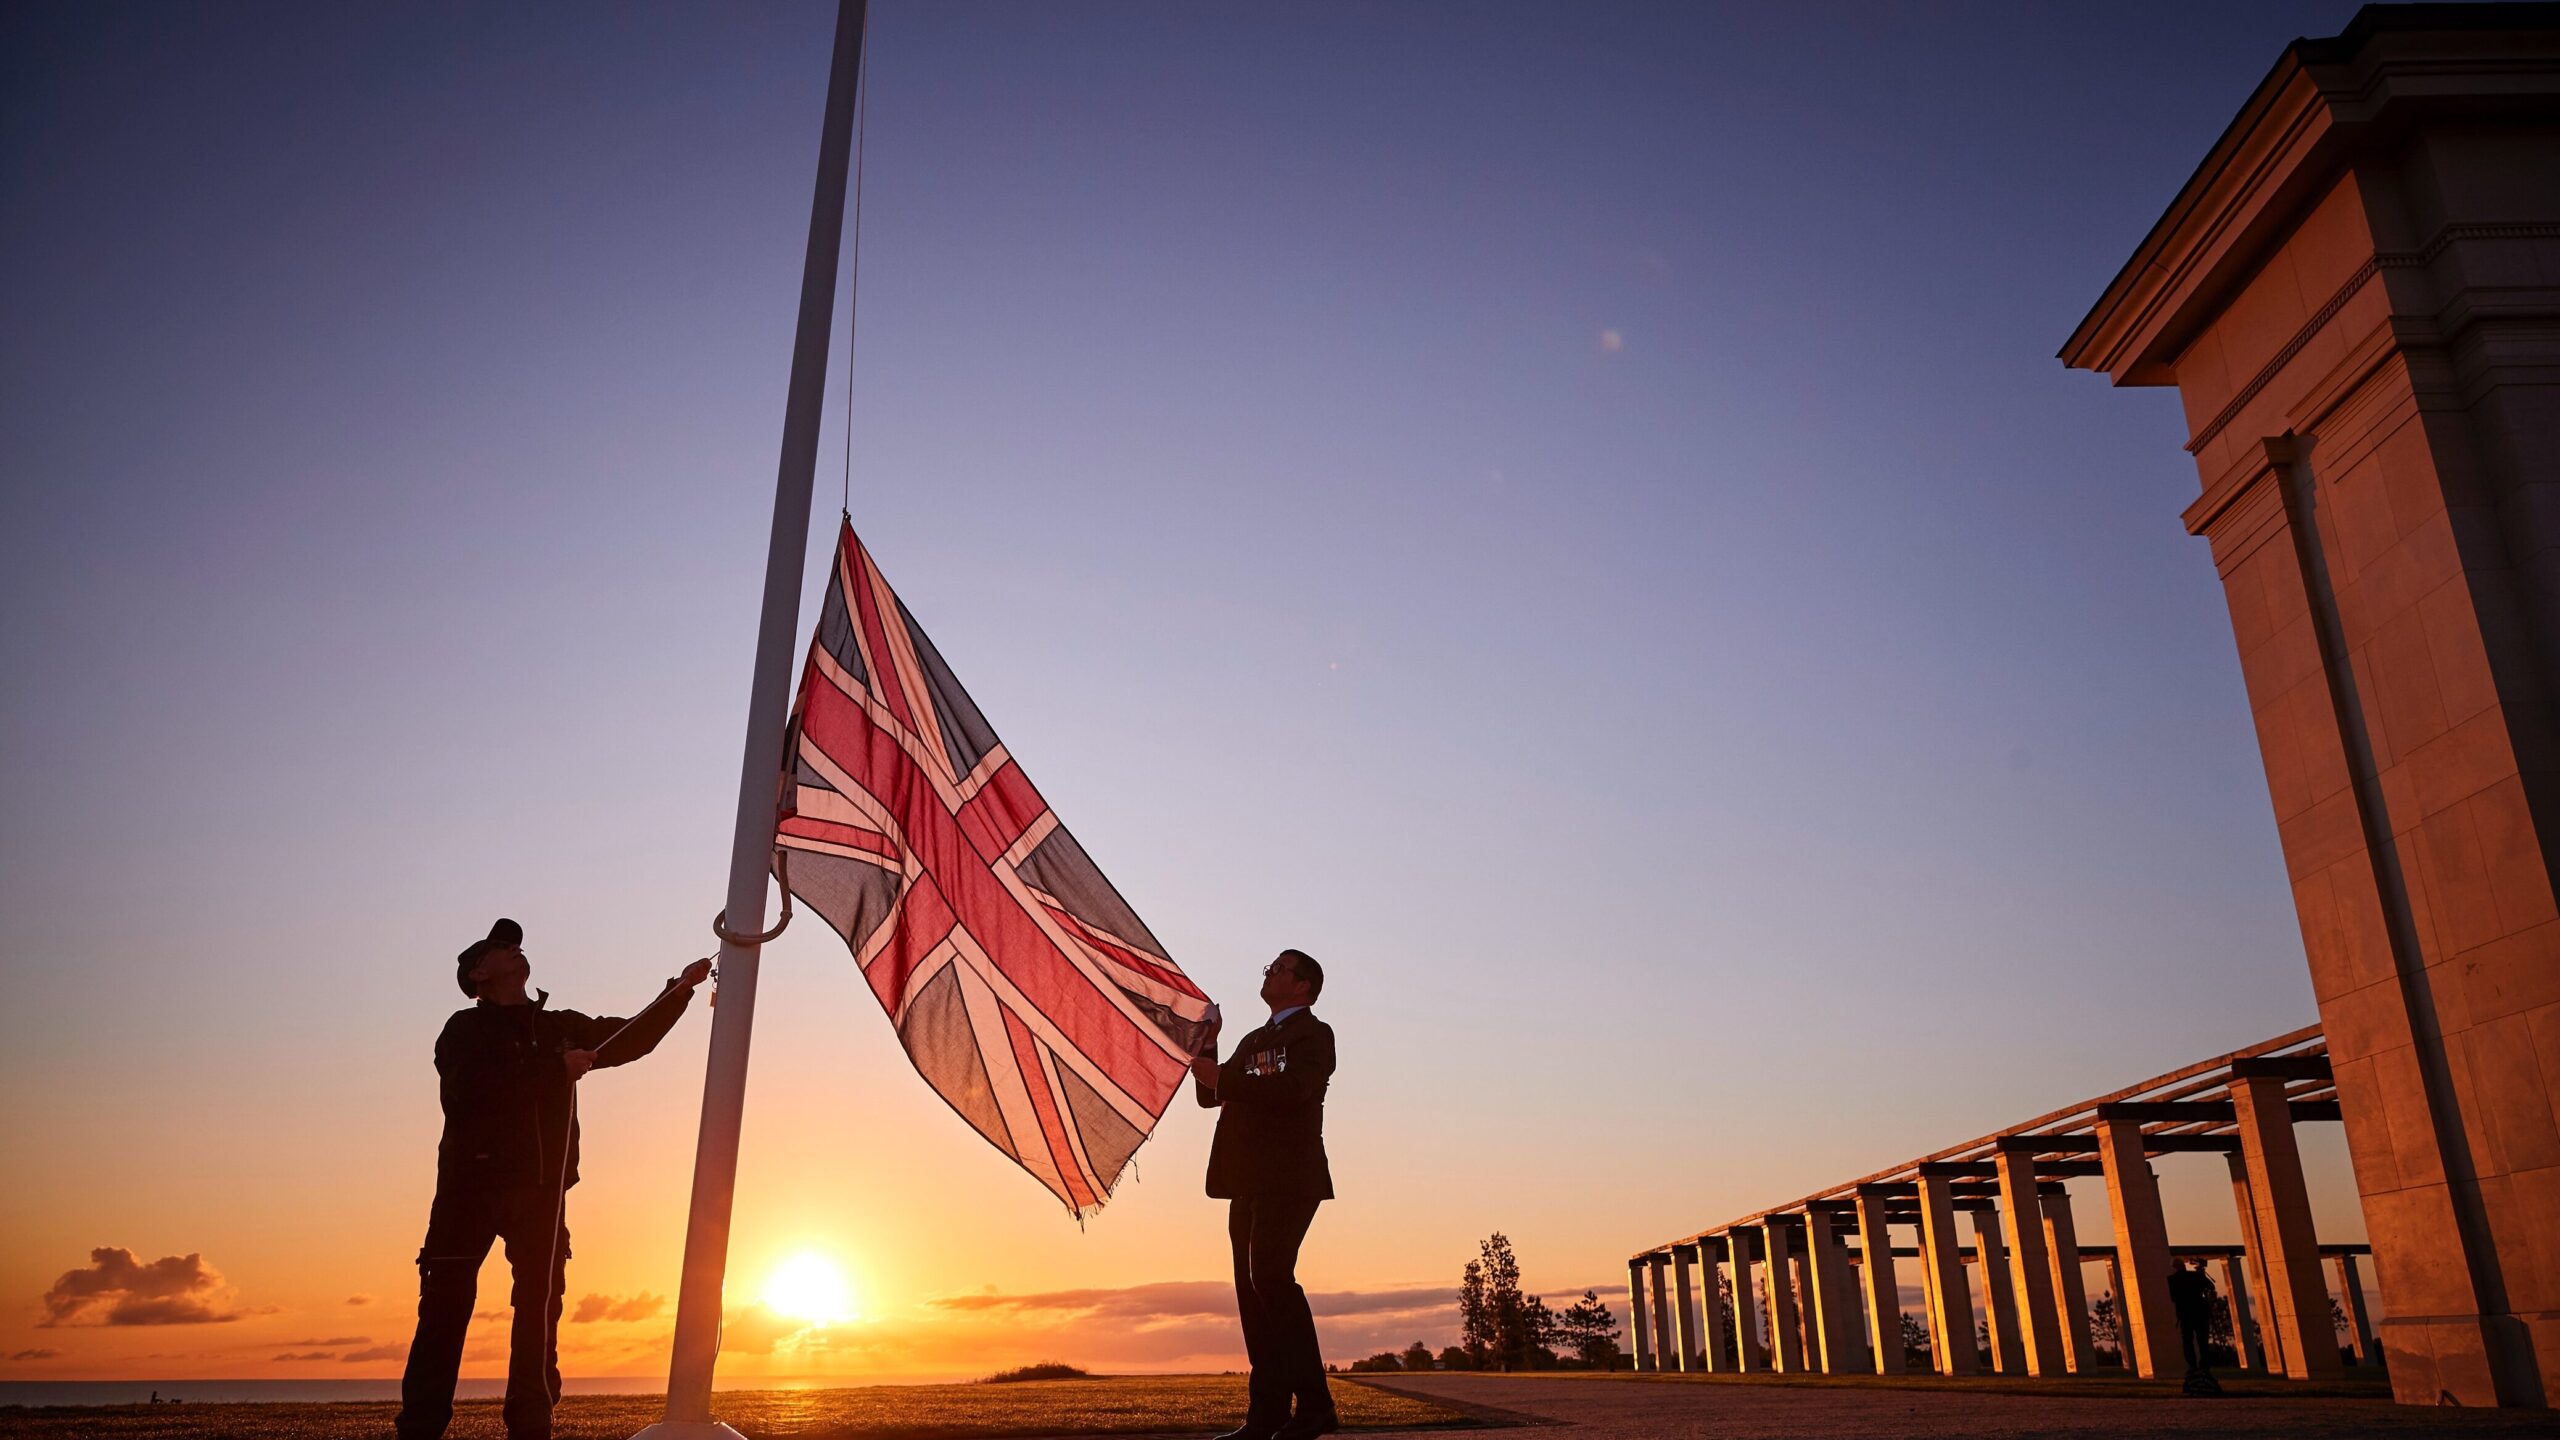 Two silhouetted figures raise a Union flag in front of a bright sunrise. The stone pillars of the British Normandy Memorial stand to the right.